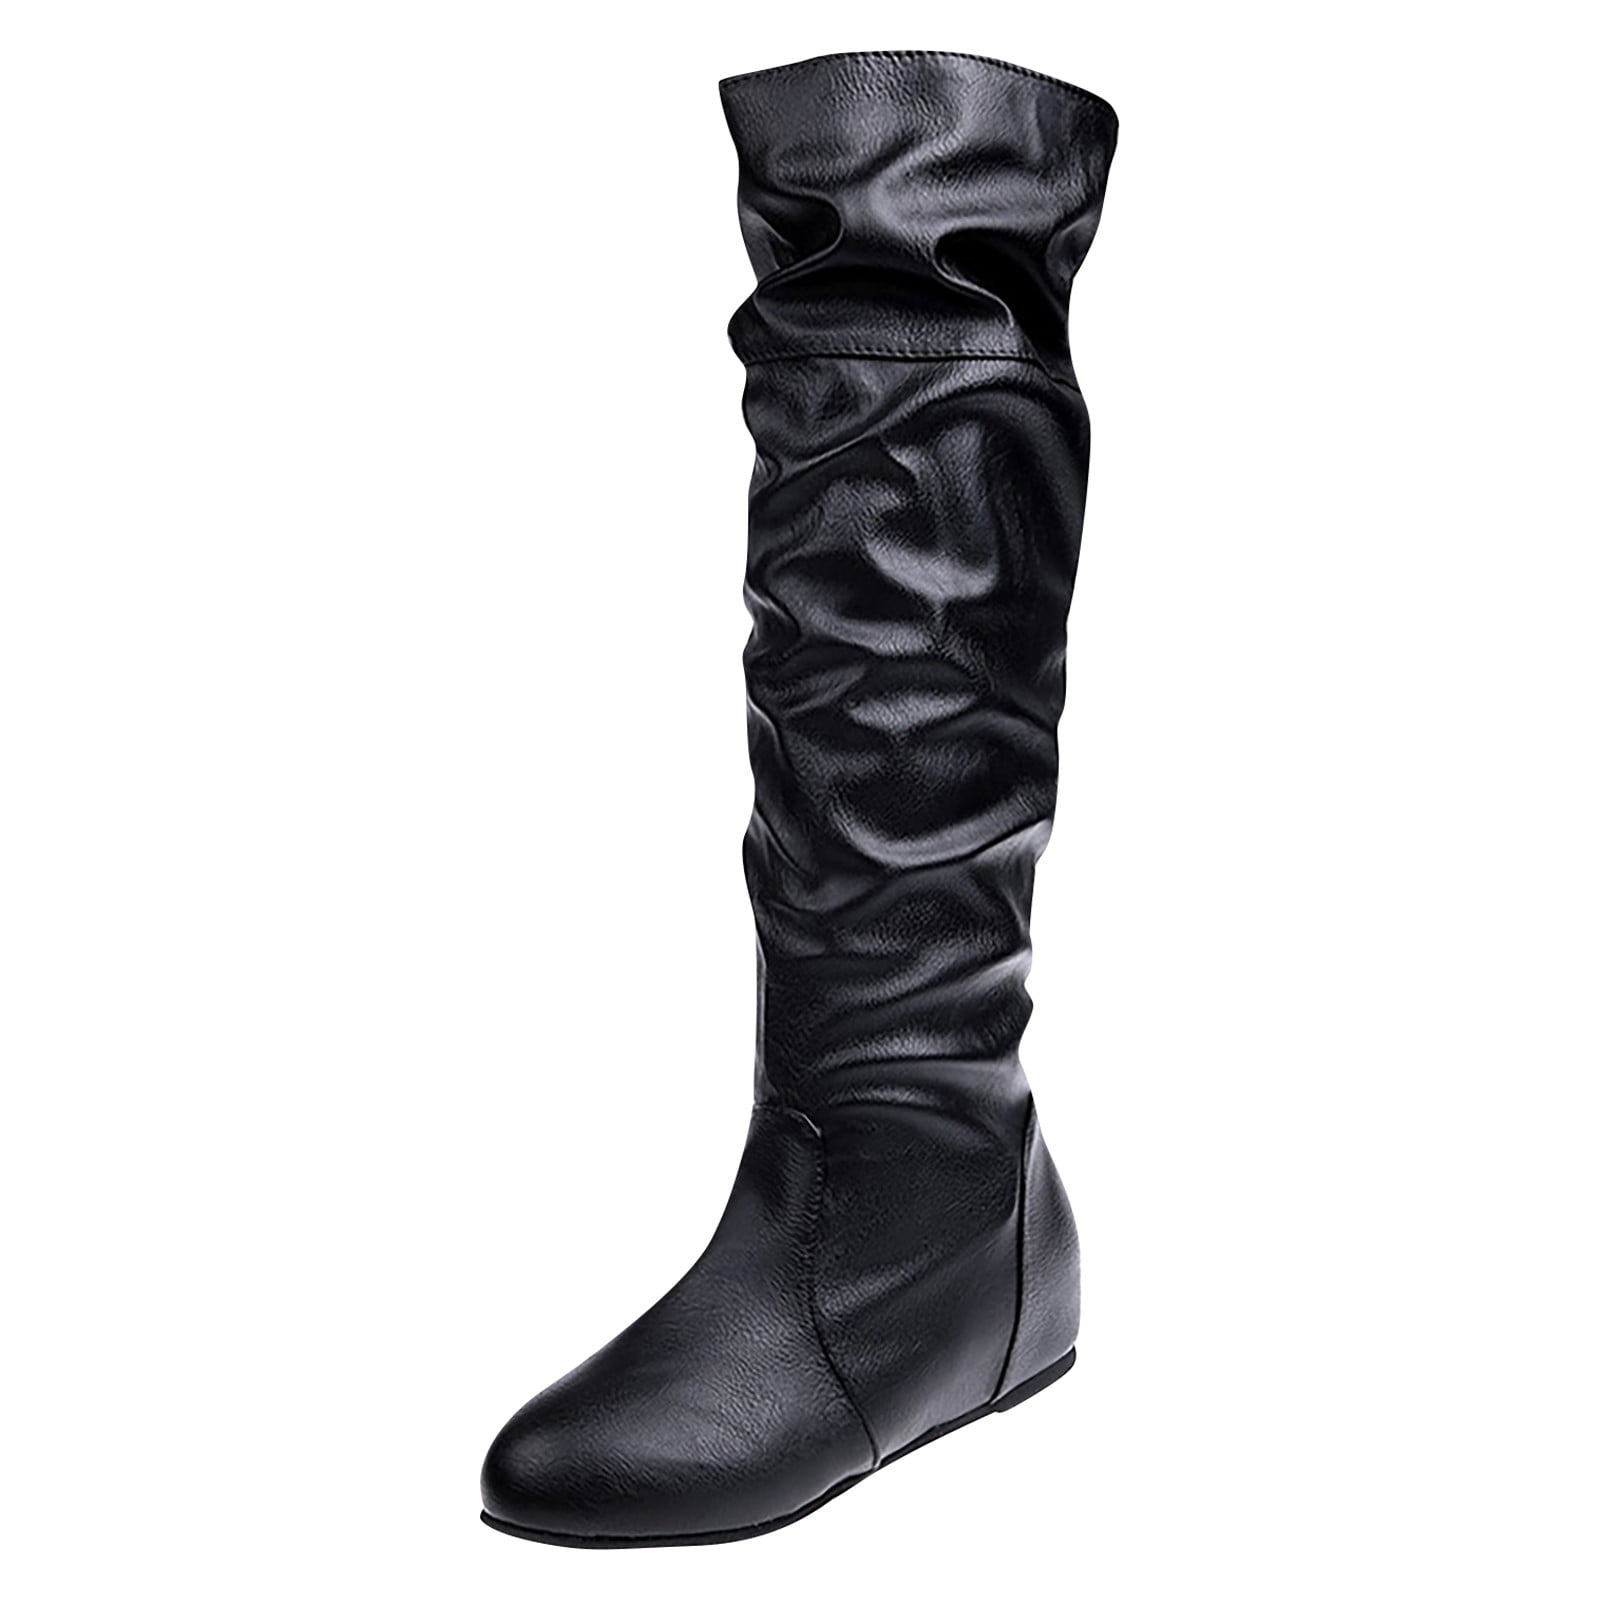 Details about   Thigh High Boots Pointy Toe Casual Women Over Knee Block Heel Shoes Outdoor D